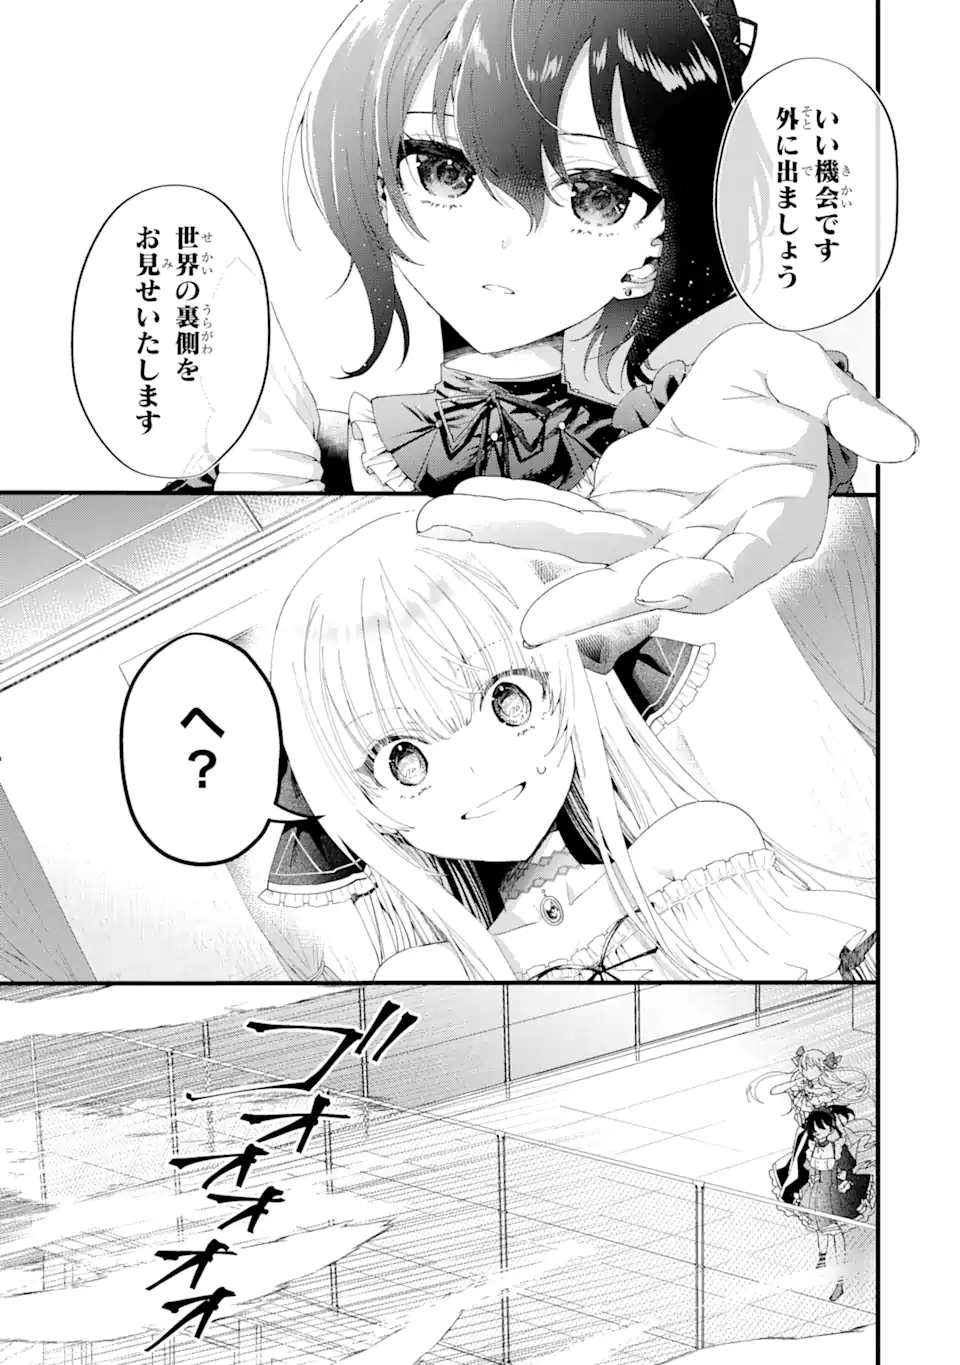 Ousama no Propose - Chapter 1.3 - Page 19